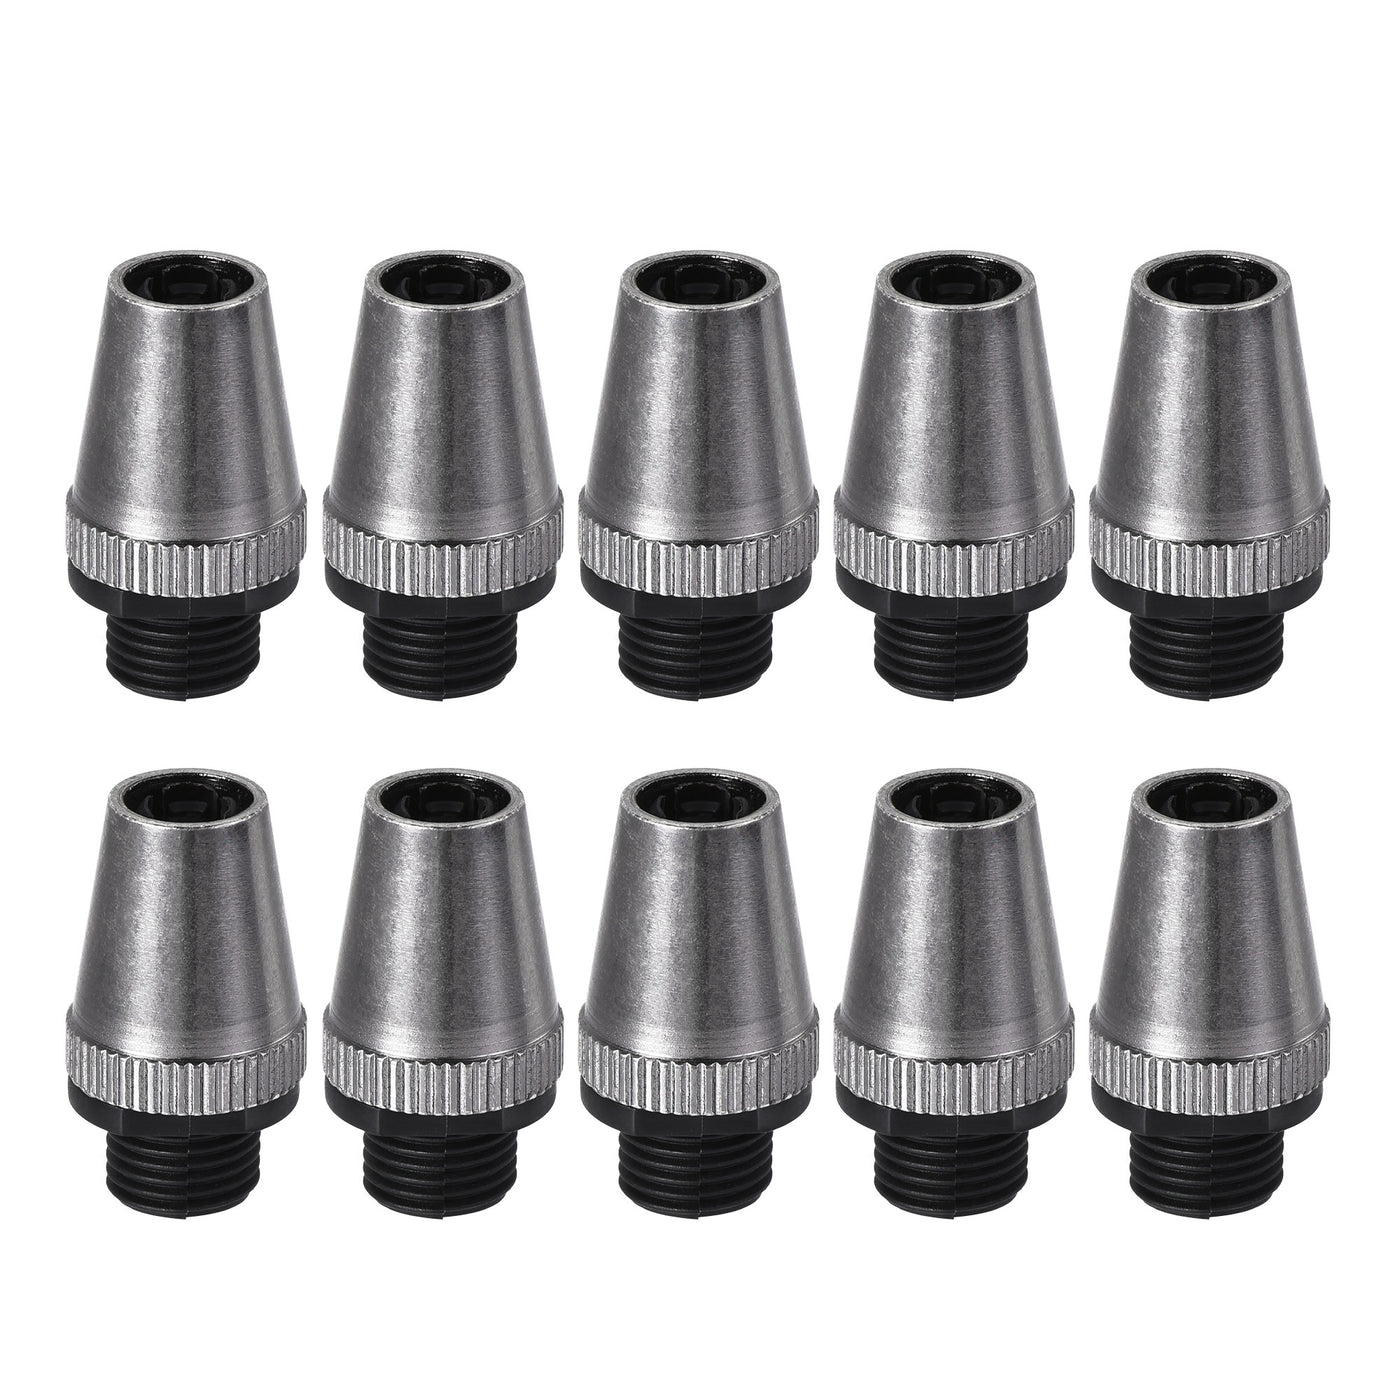 uxcell Uxcell Cable Glands Strain Relief Cord Grips Metal Black 10Pcs for Wiring Hanging Light Ceiling Pendant Lamp